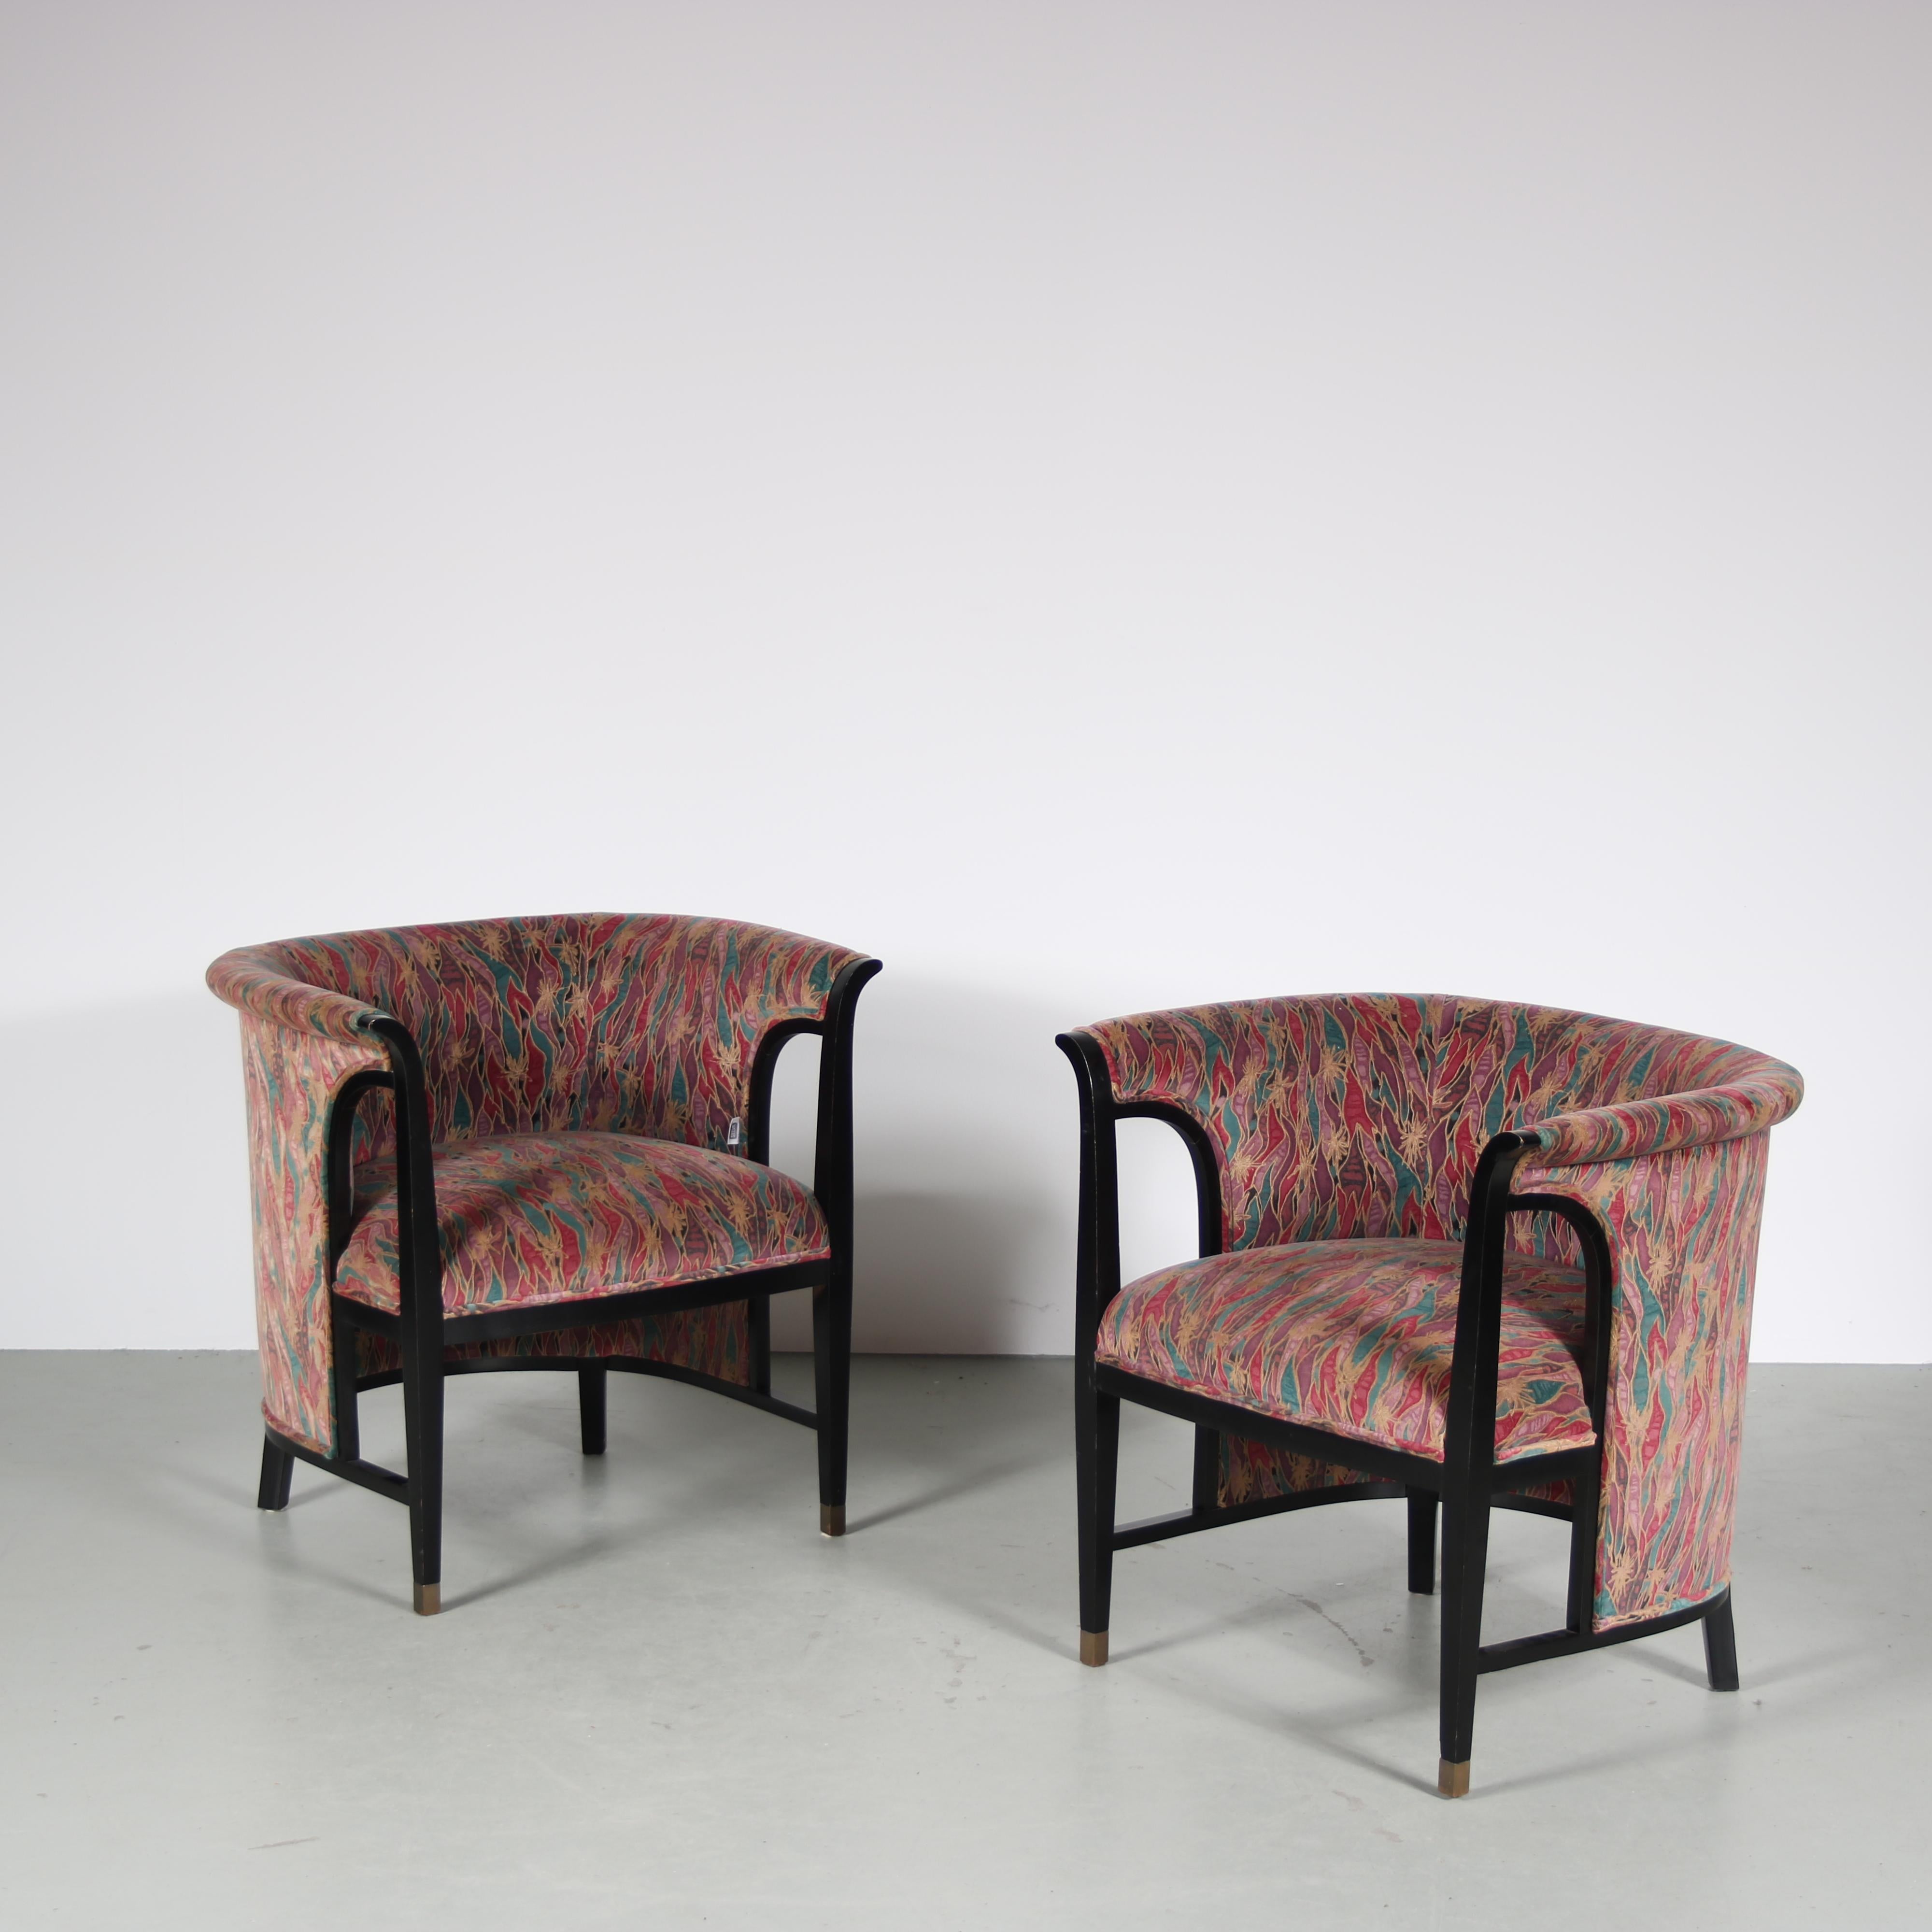 Italian 1980s Pair of unique armchairs by Selva, Italy